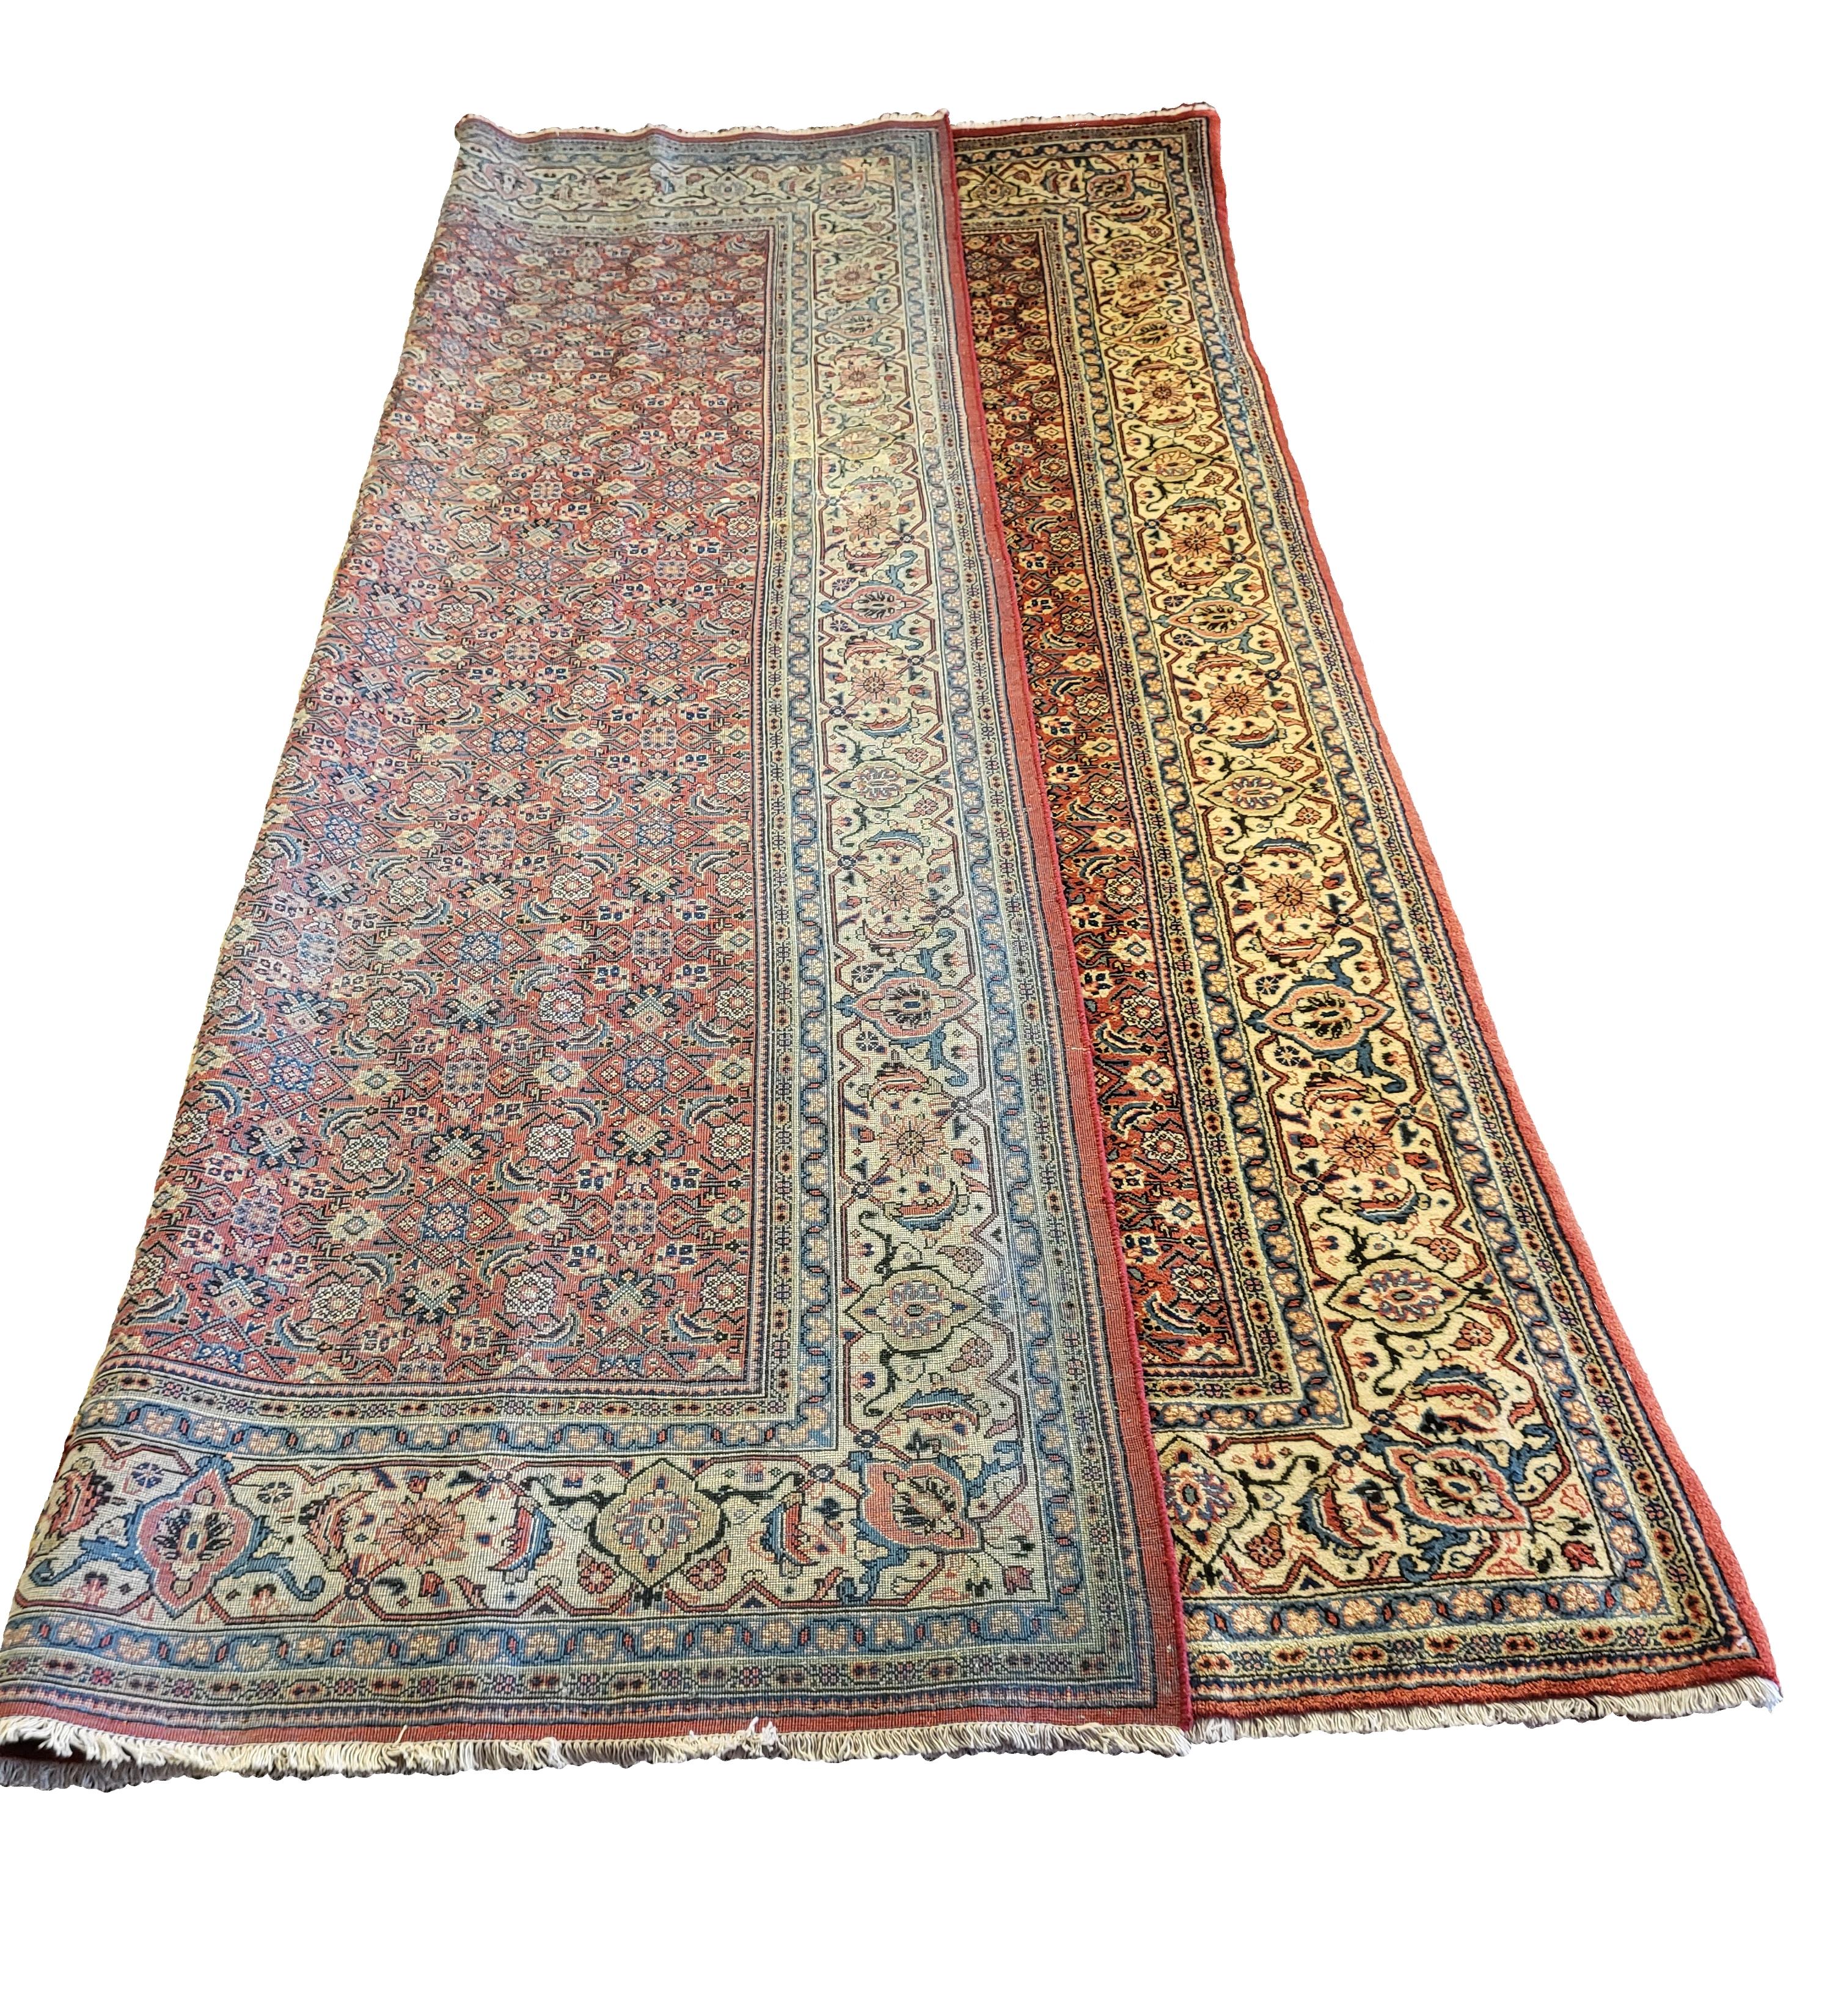 Early 20th Century Persian Sarouk - All Over Mahi Design - Coral / Pink & Cream In Good Condition For Sale In Blacksburg, VA